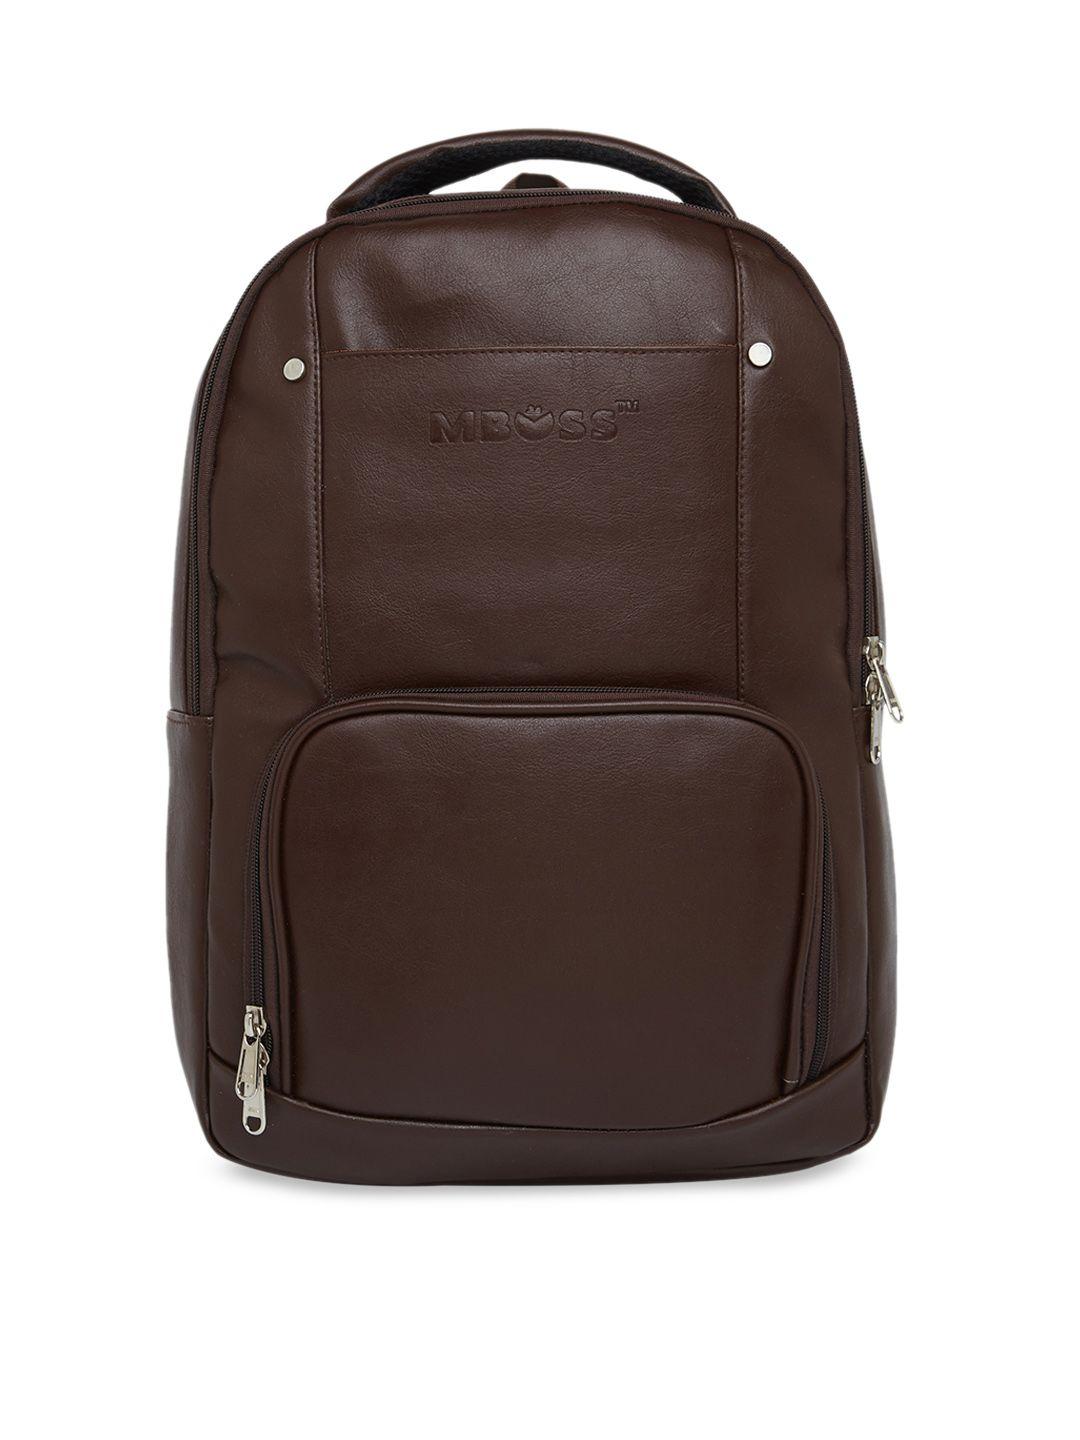 mboss unisex brown solid backpack